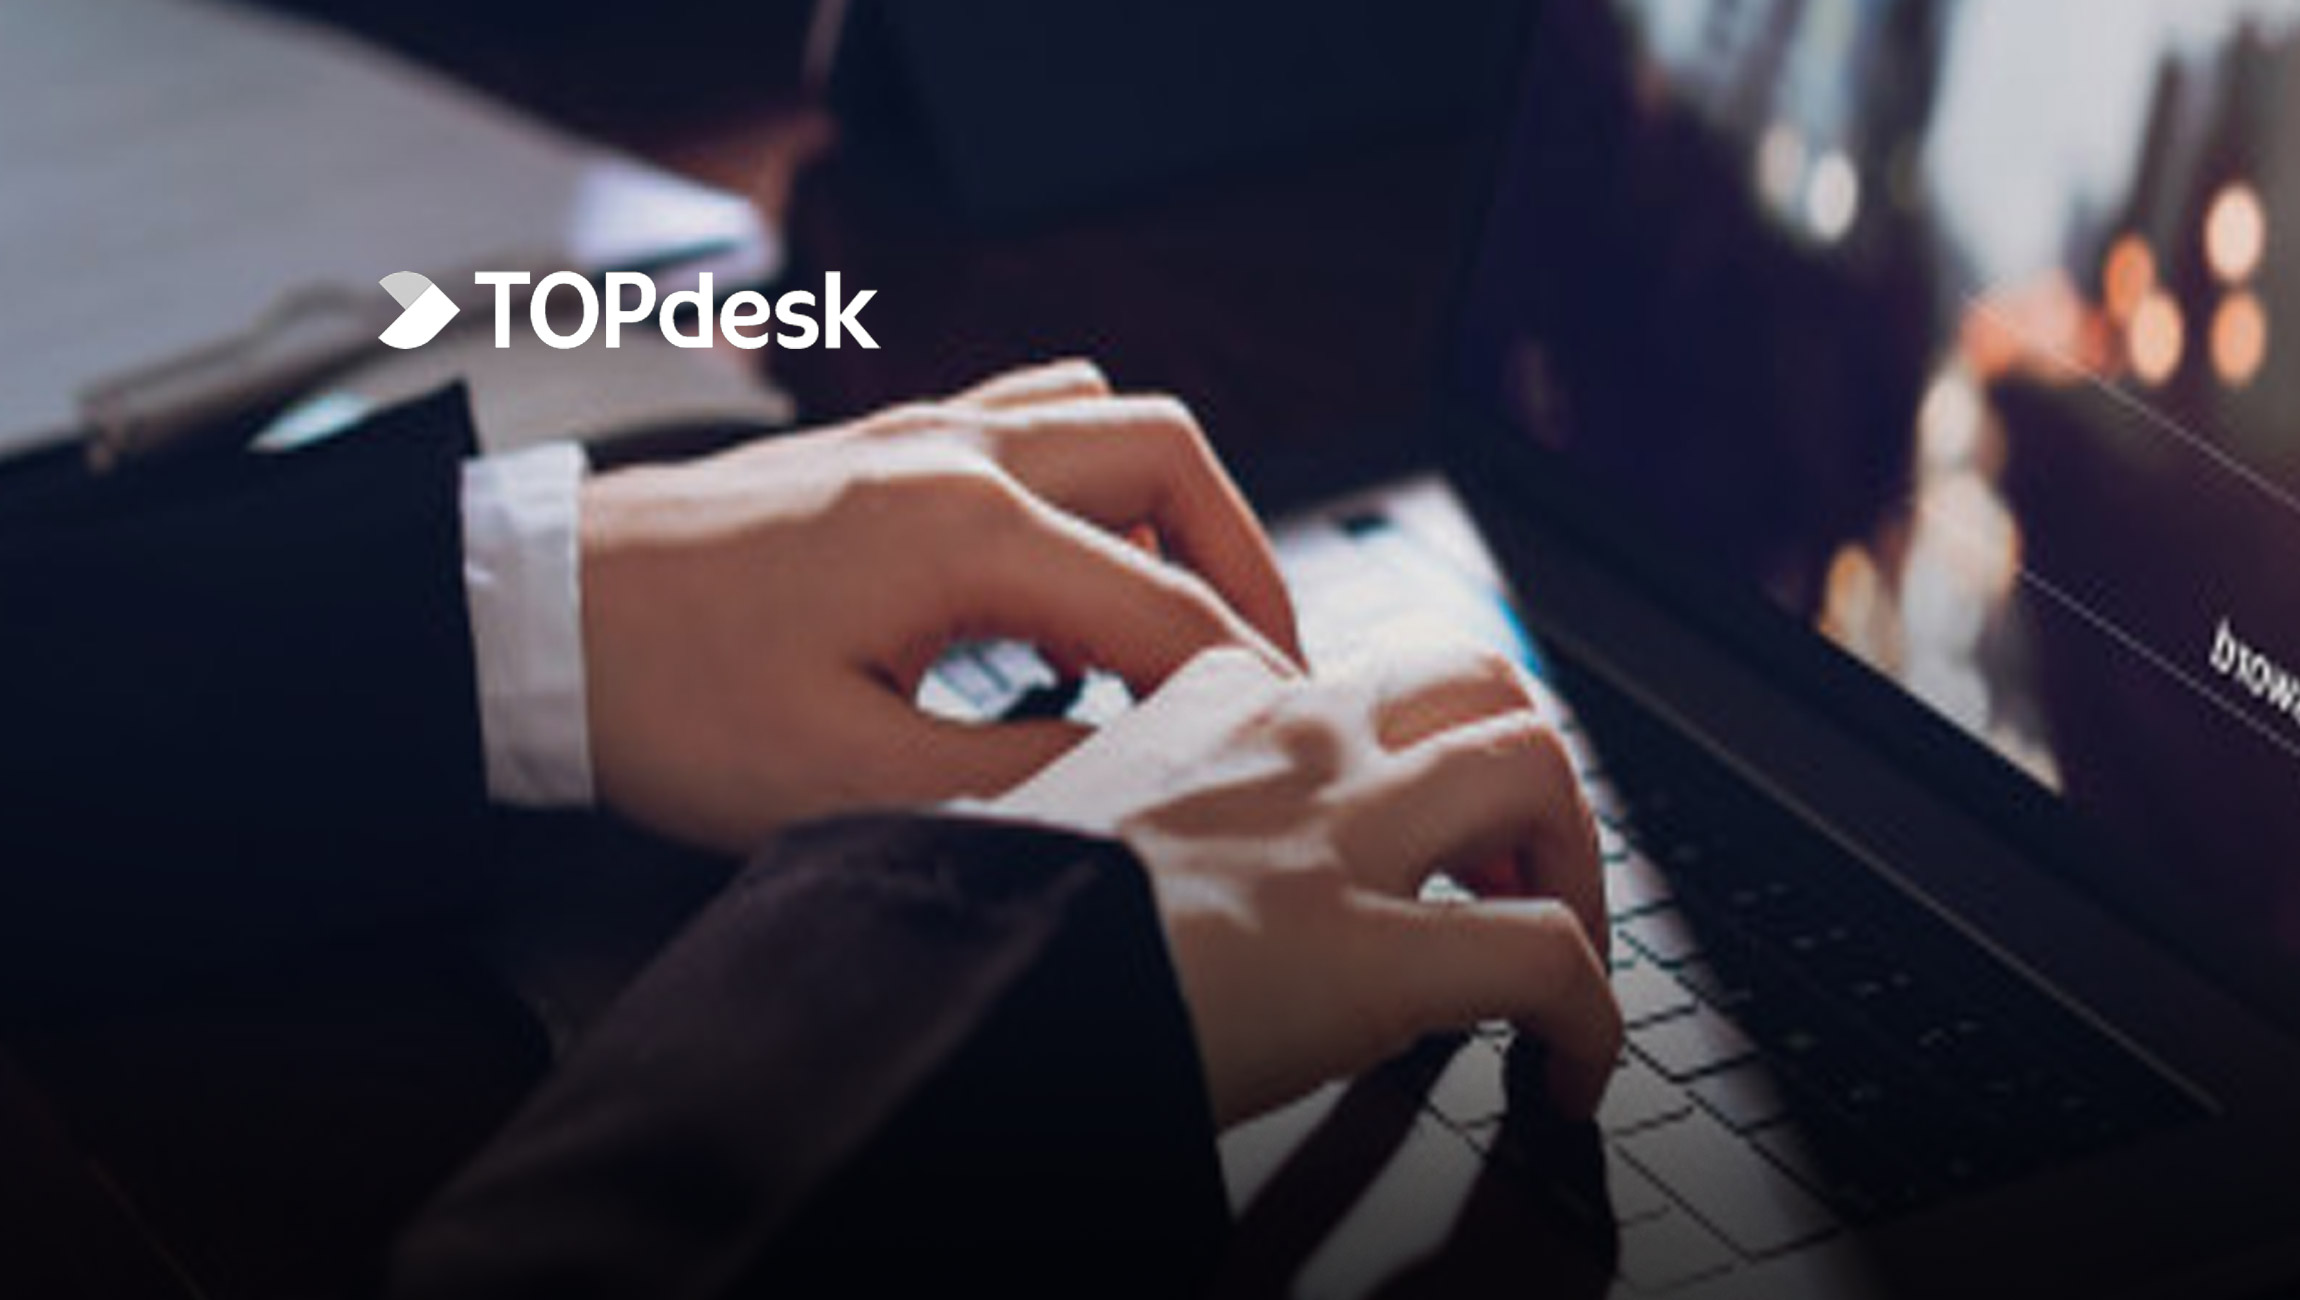 TOPdesk Named A "Contender" In Enterprise Service Management Report By Independent Research Firm